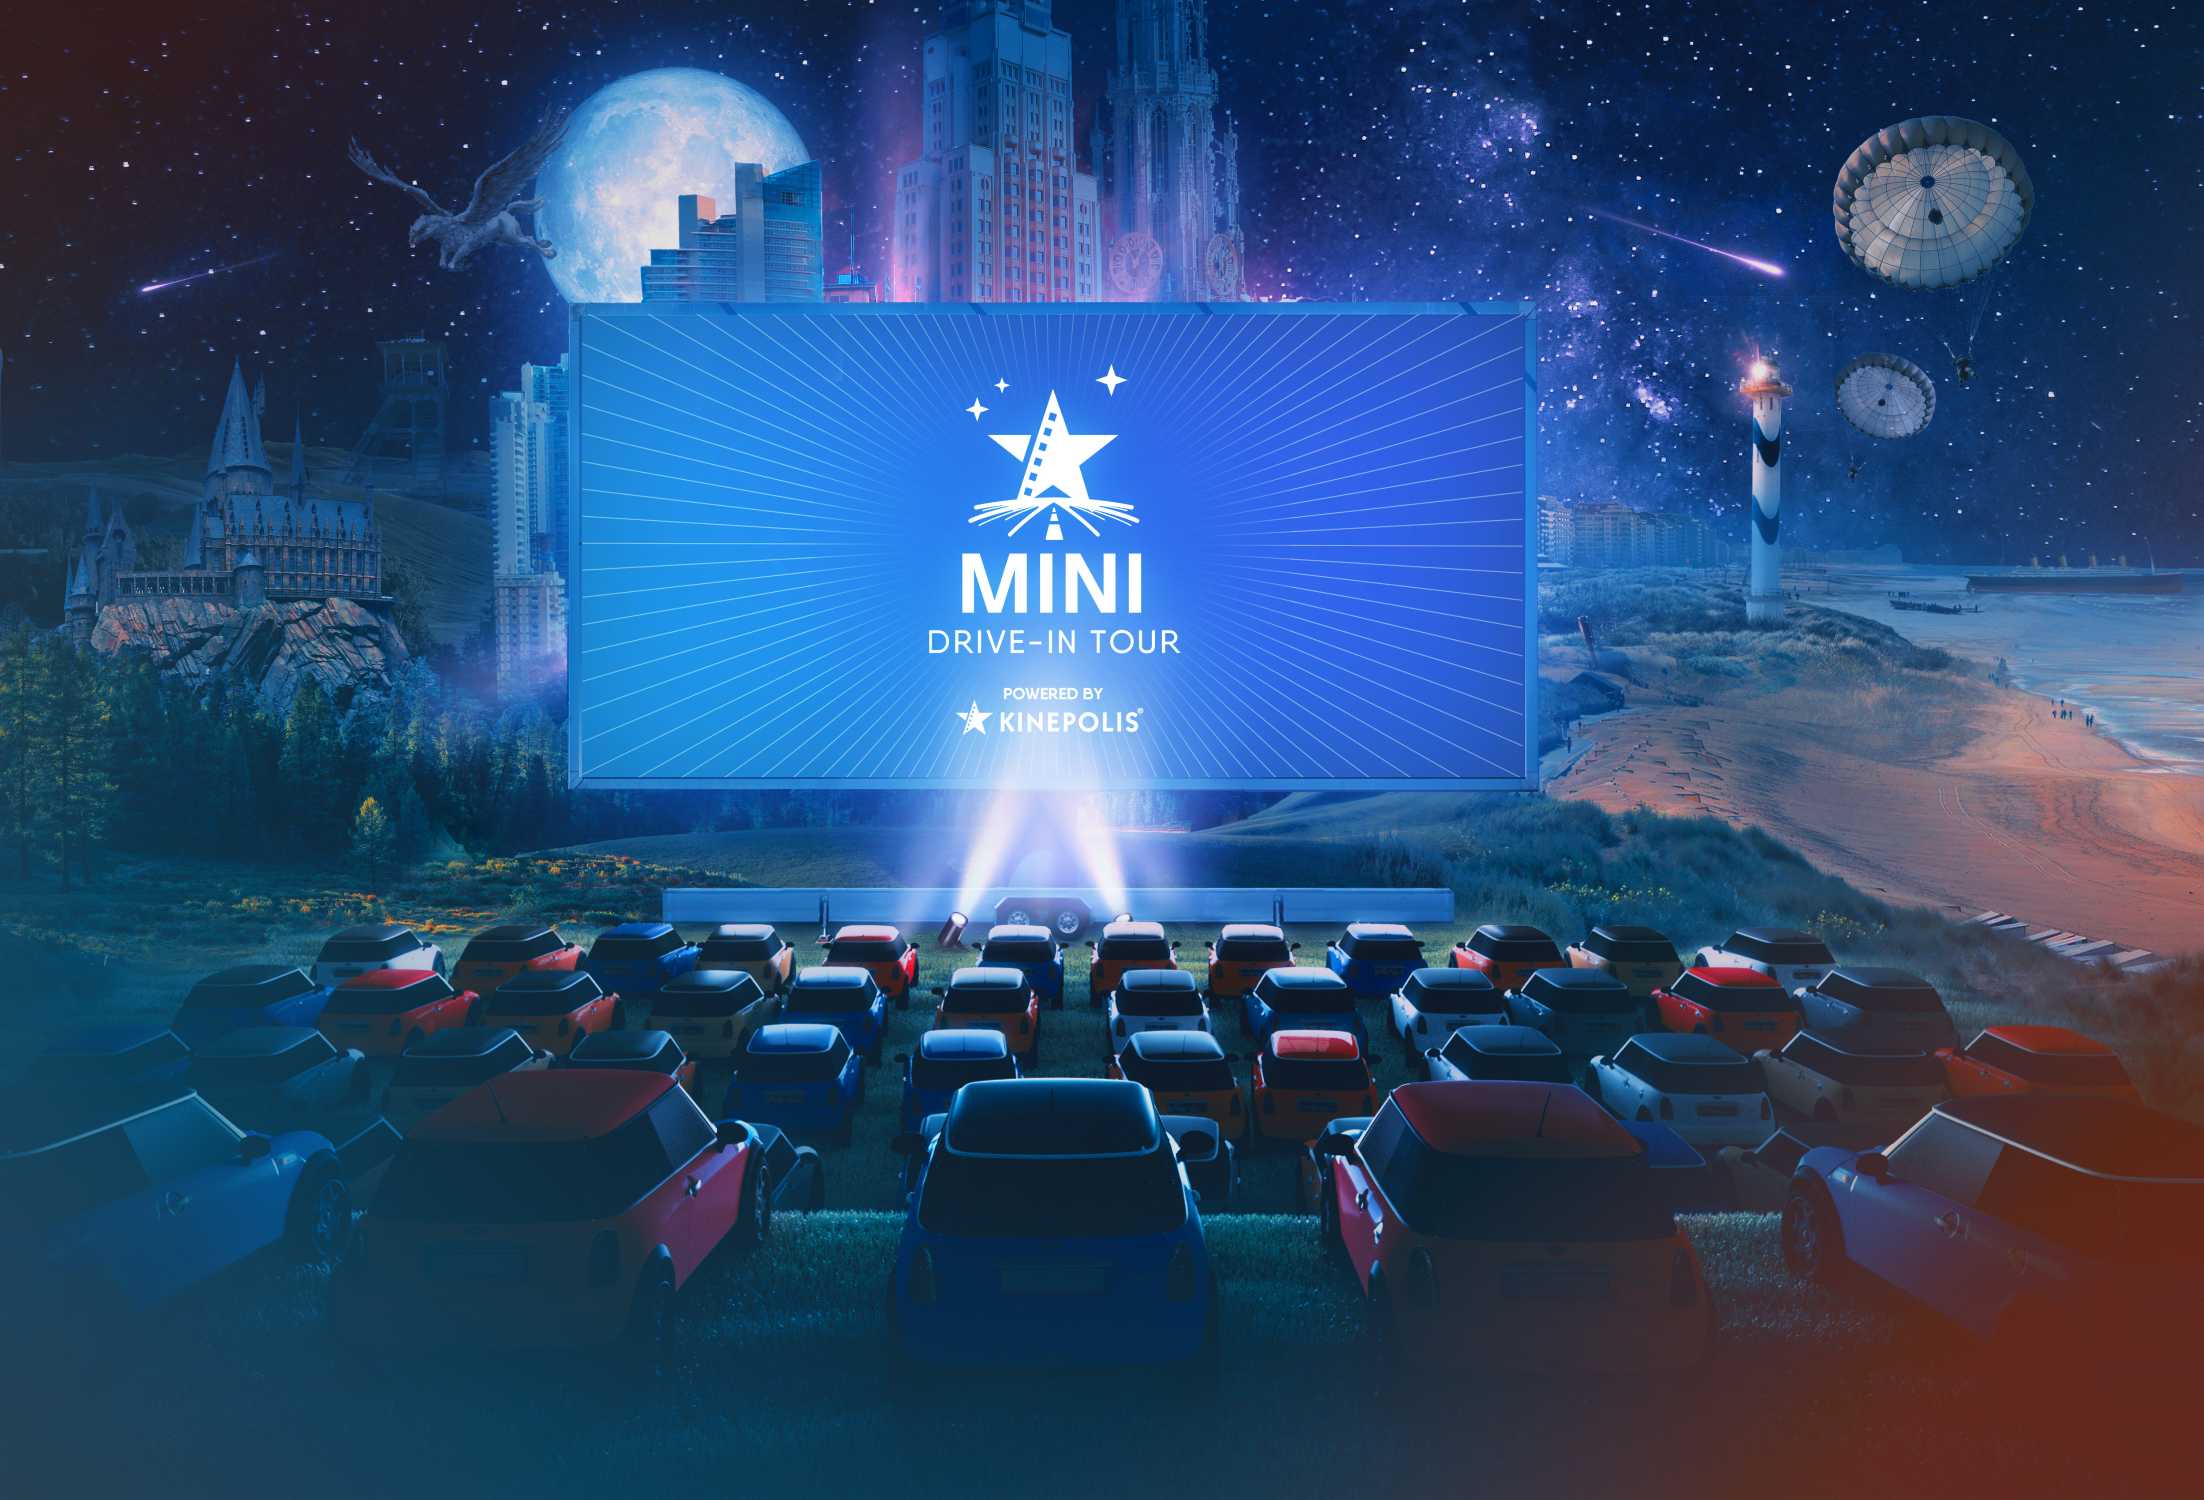 MINI DRIVE-IN TOUR powered by Kinepolis (06/2020)